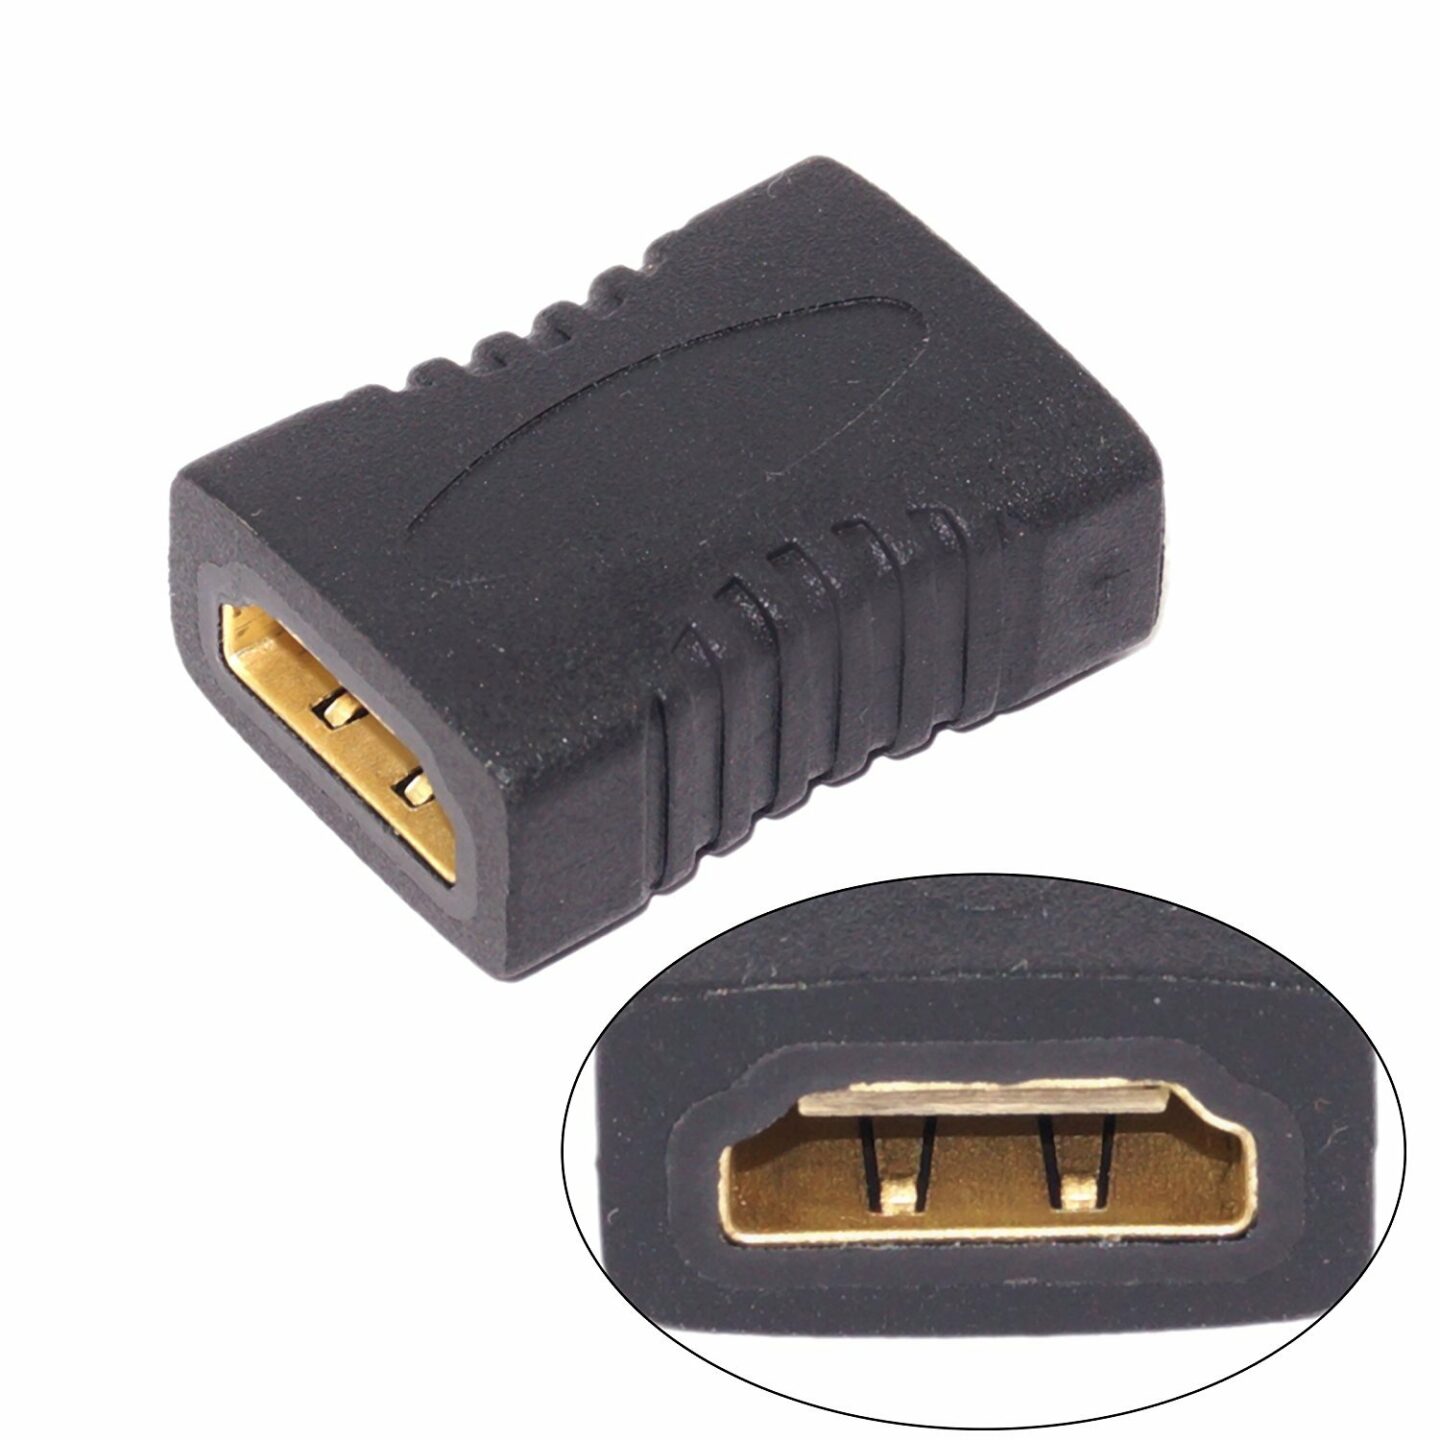 HDMI Cable Jointer Female to Female; Buy HDMI Cable Jointer Female to Female Coupler Adapter Best Price in Sri Lanka For Online Shopping | ido.lk